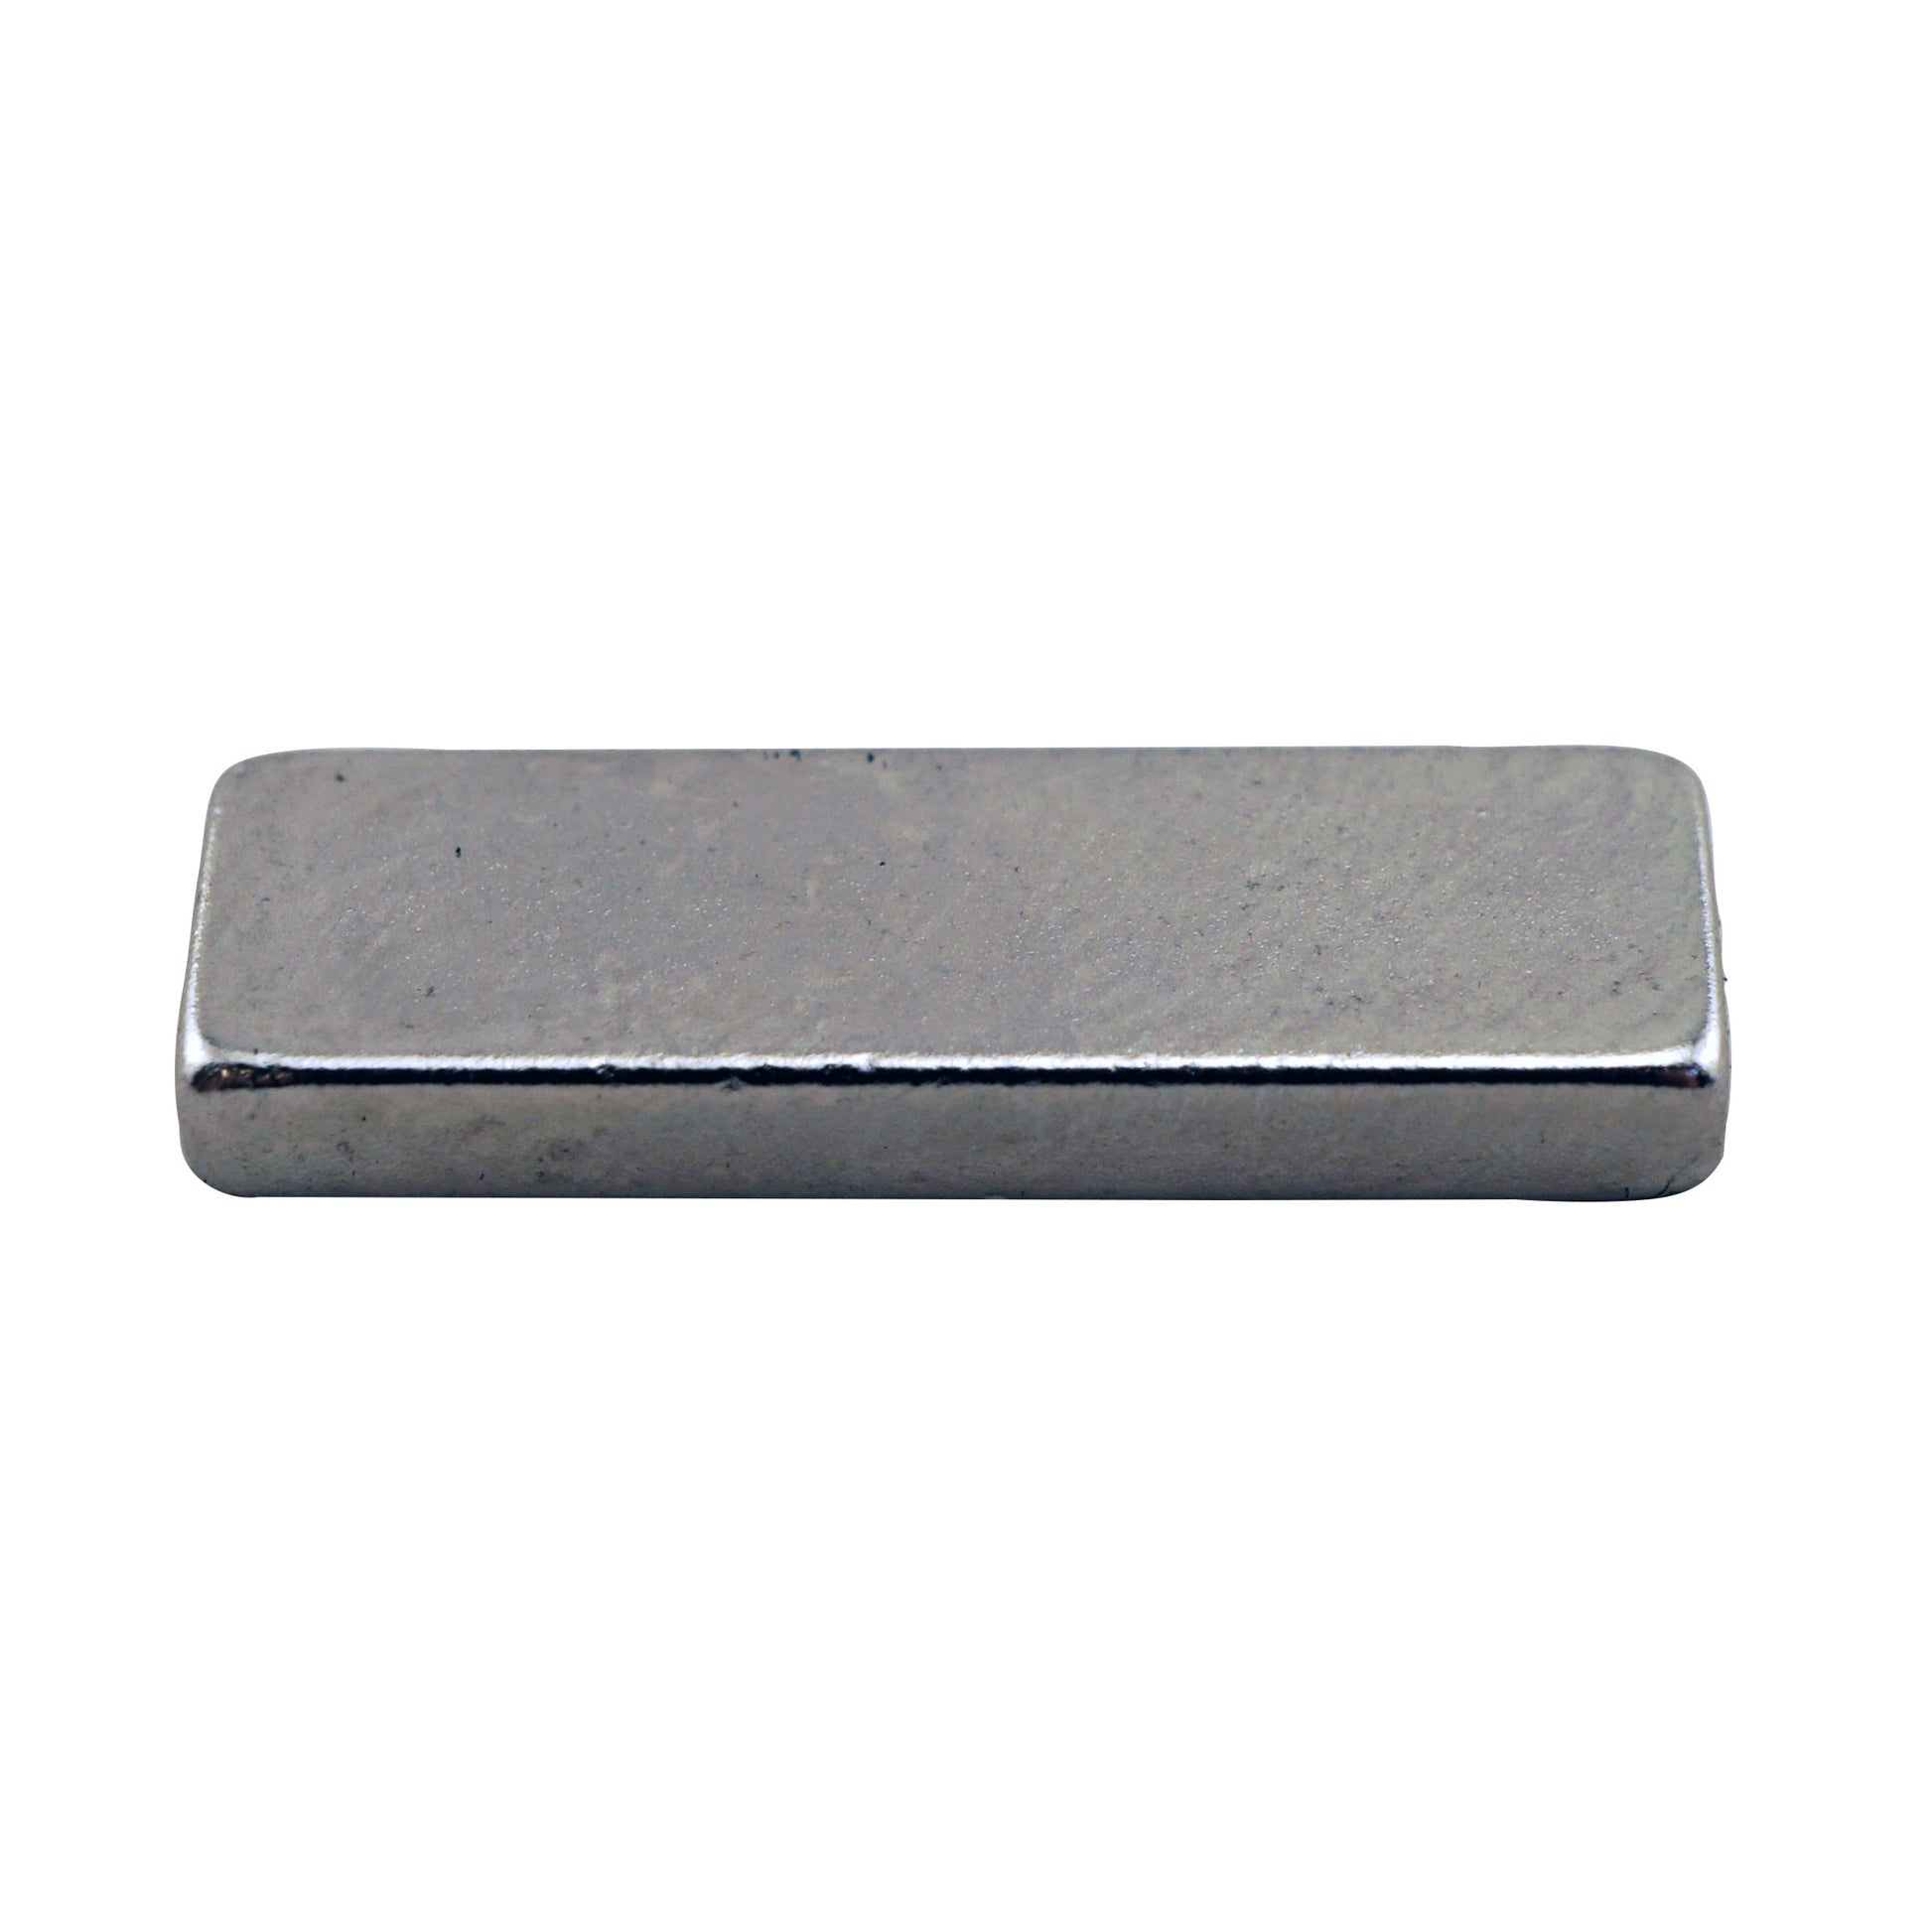 Load image into Gallery viewer, NB001008N Neodymium Block Magnet - 45 Degree Angle View